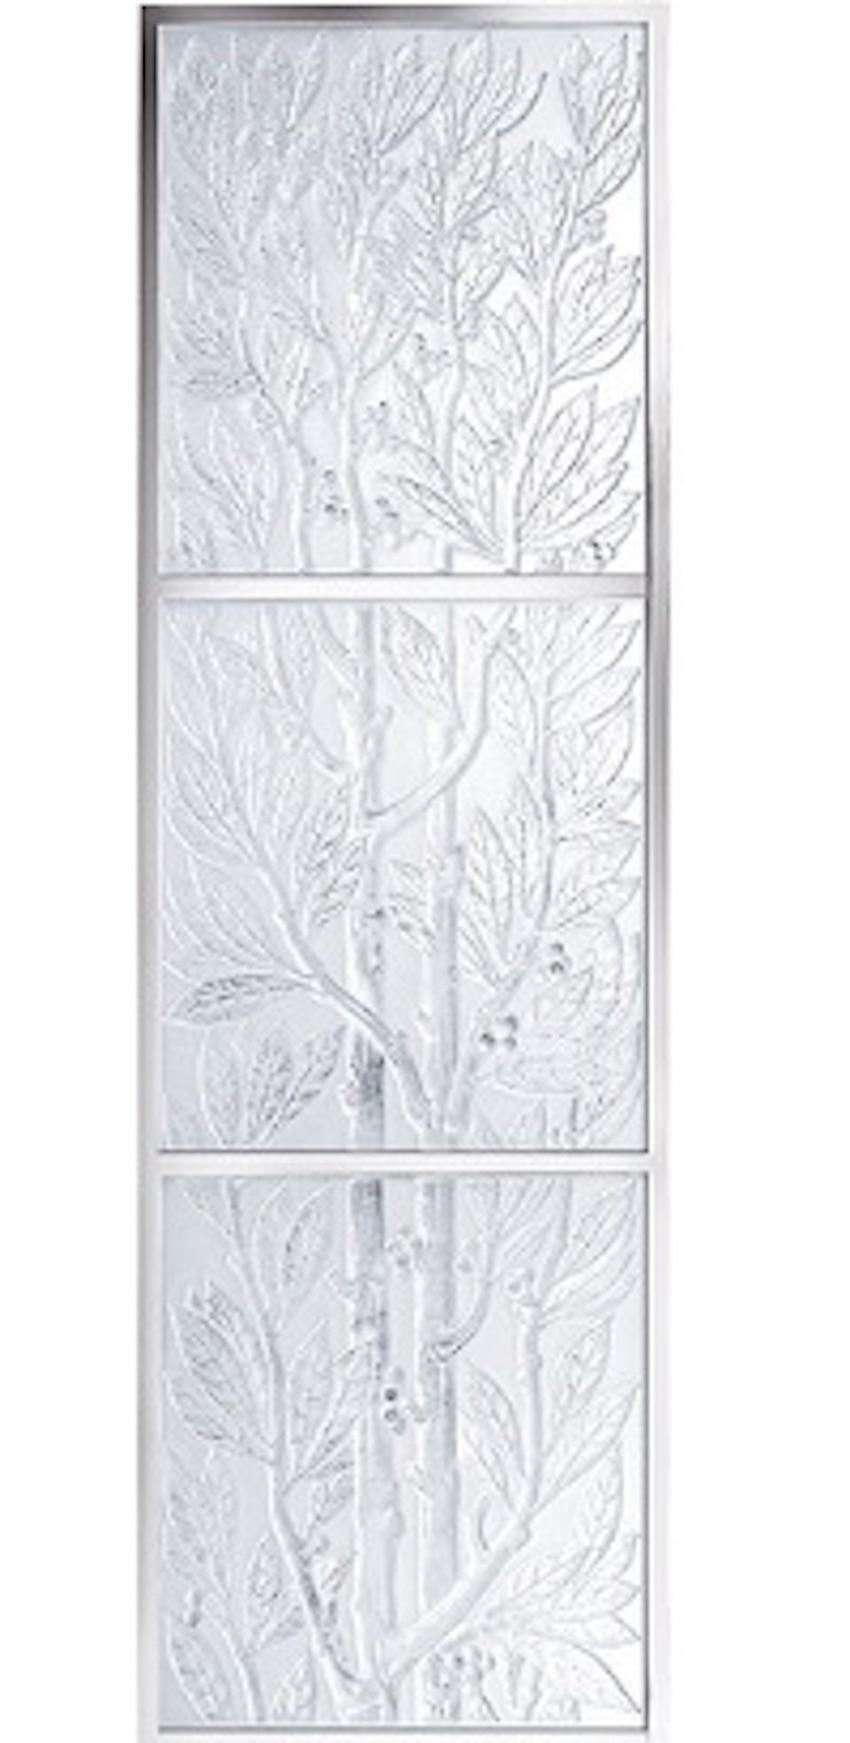 
Product information
Reference: 1024200

The Lauriers decorative panels were created by René Lalique in 1923 to adorn the presidential railway car of President Millerand. It is Art Deco inspired with geometric and floral shapes, representative